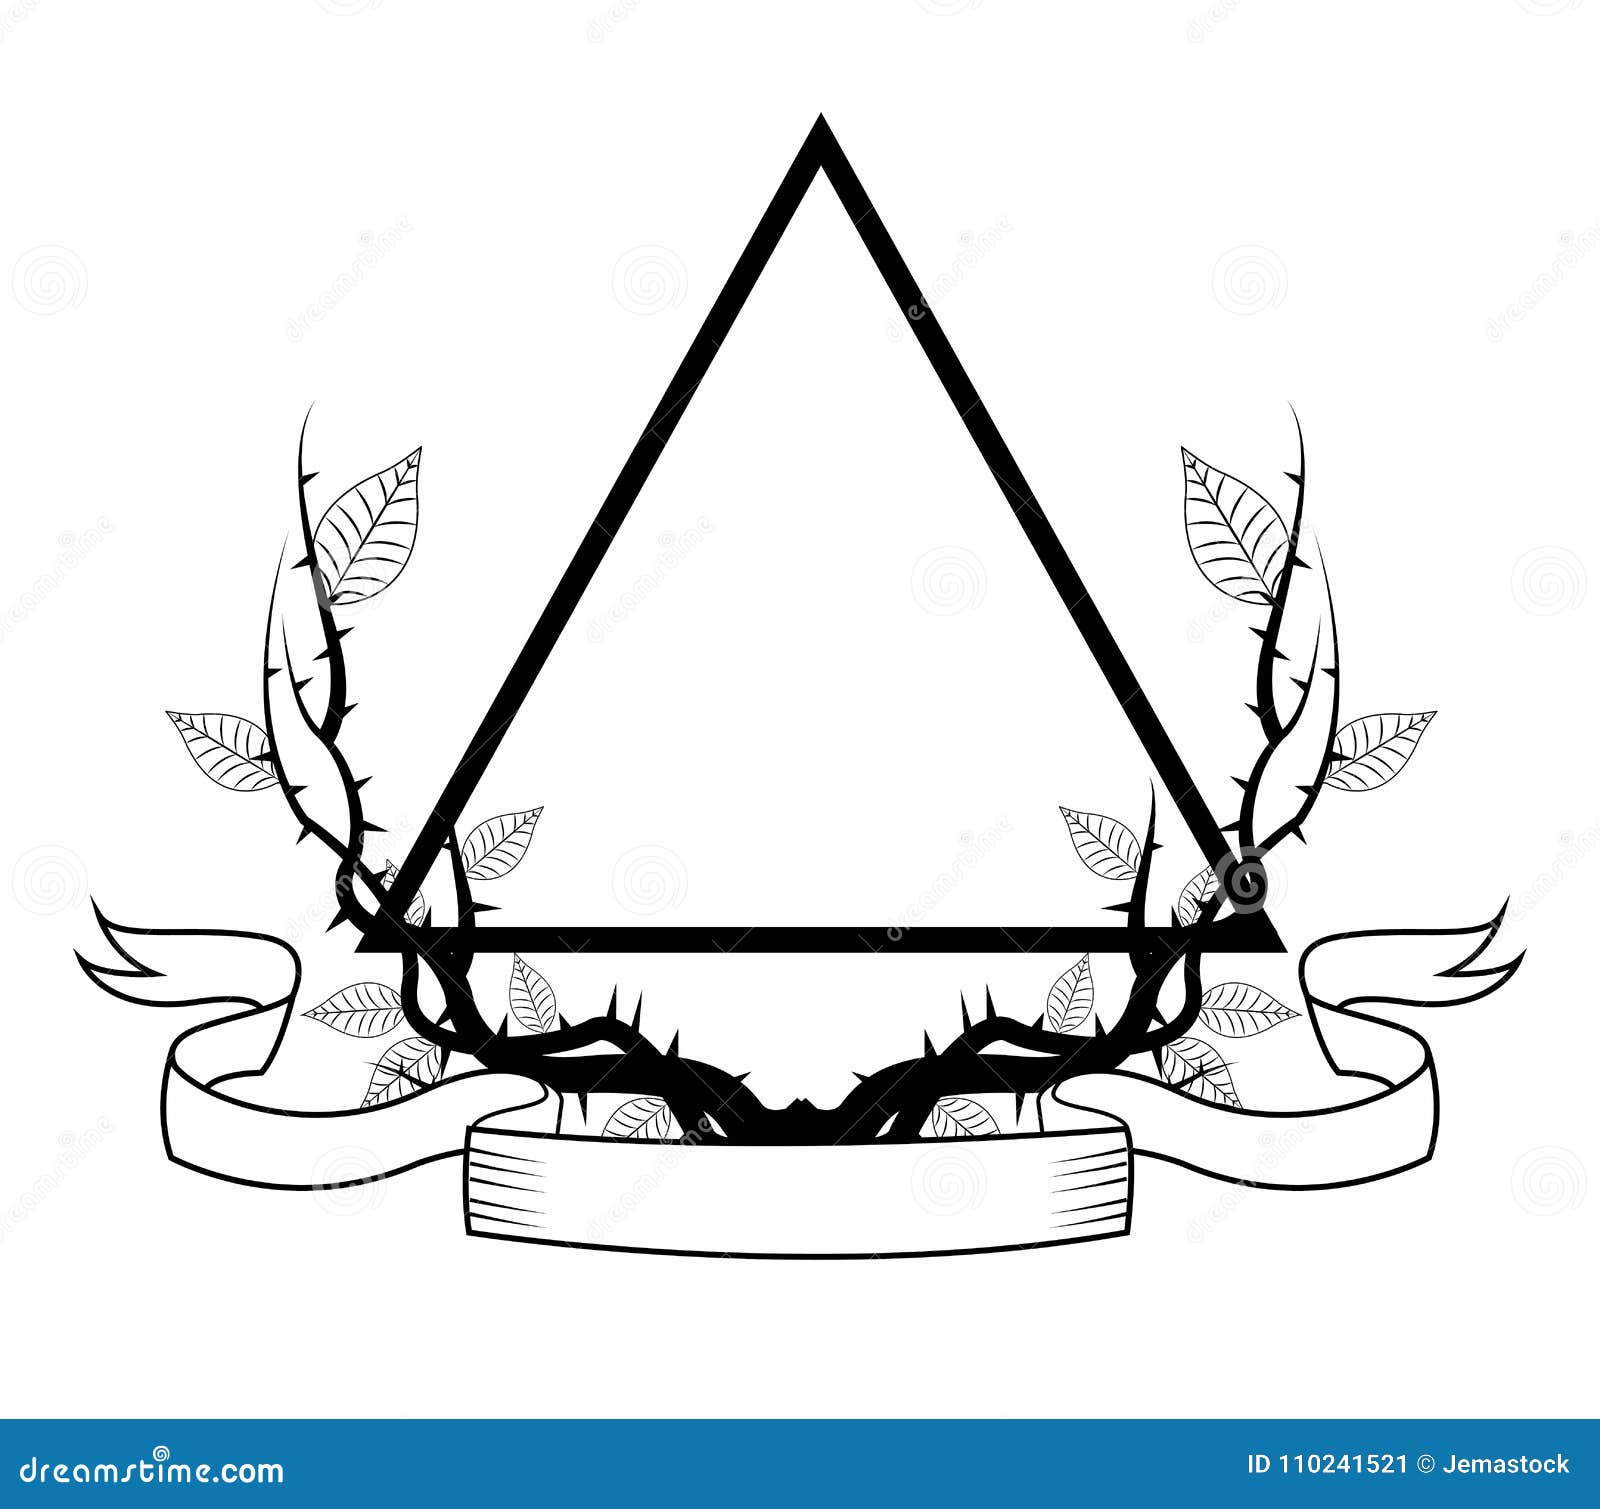 Details more than 227 triangle tattoo vector super hot